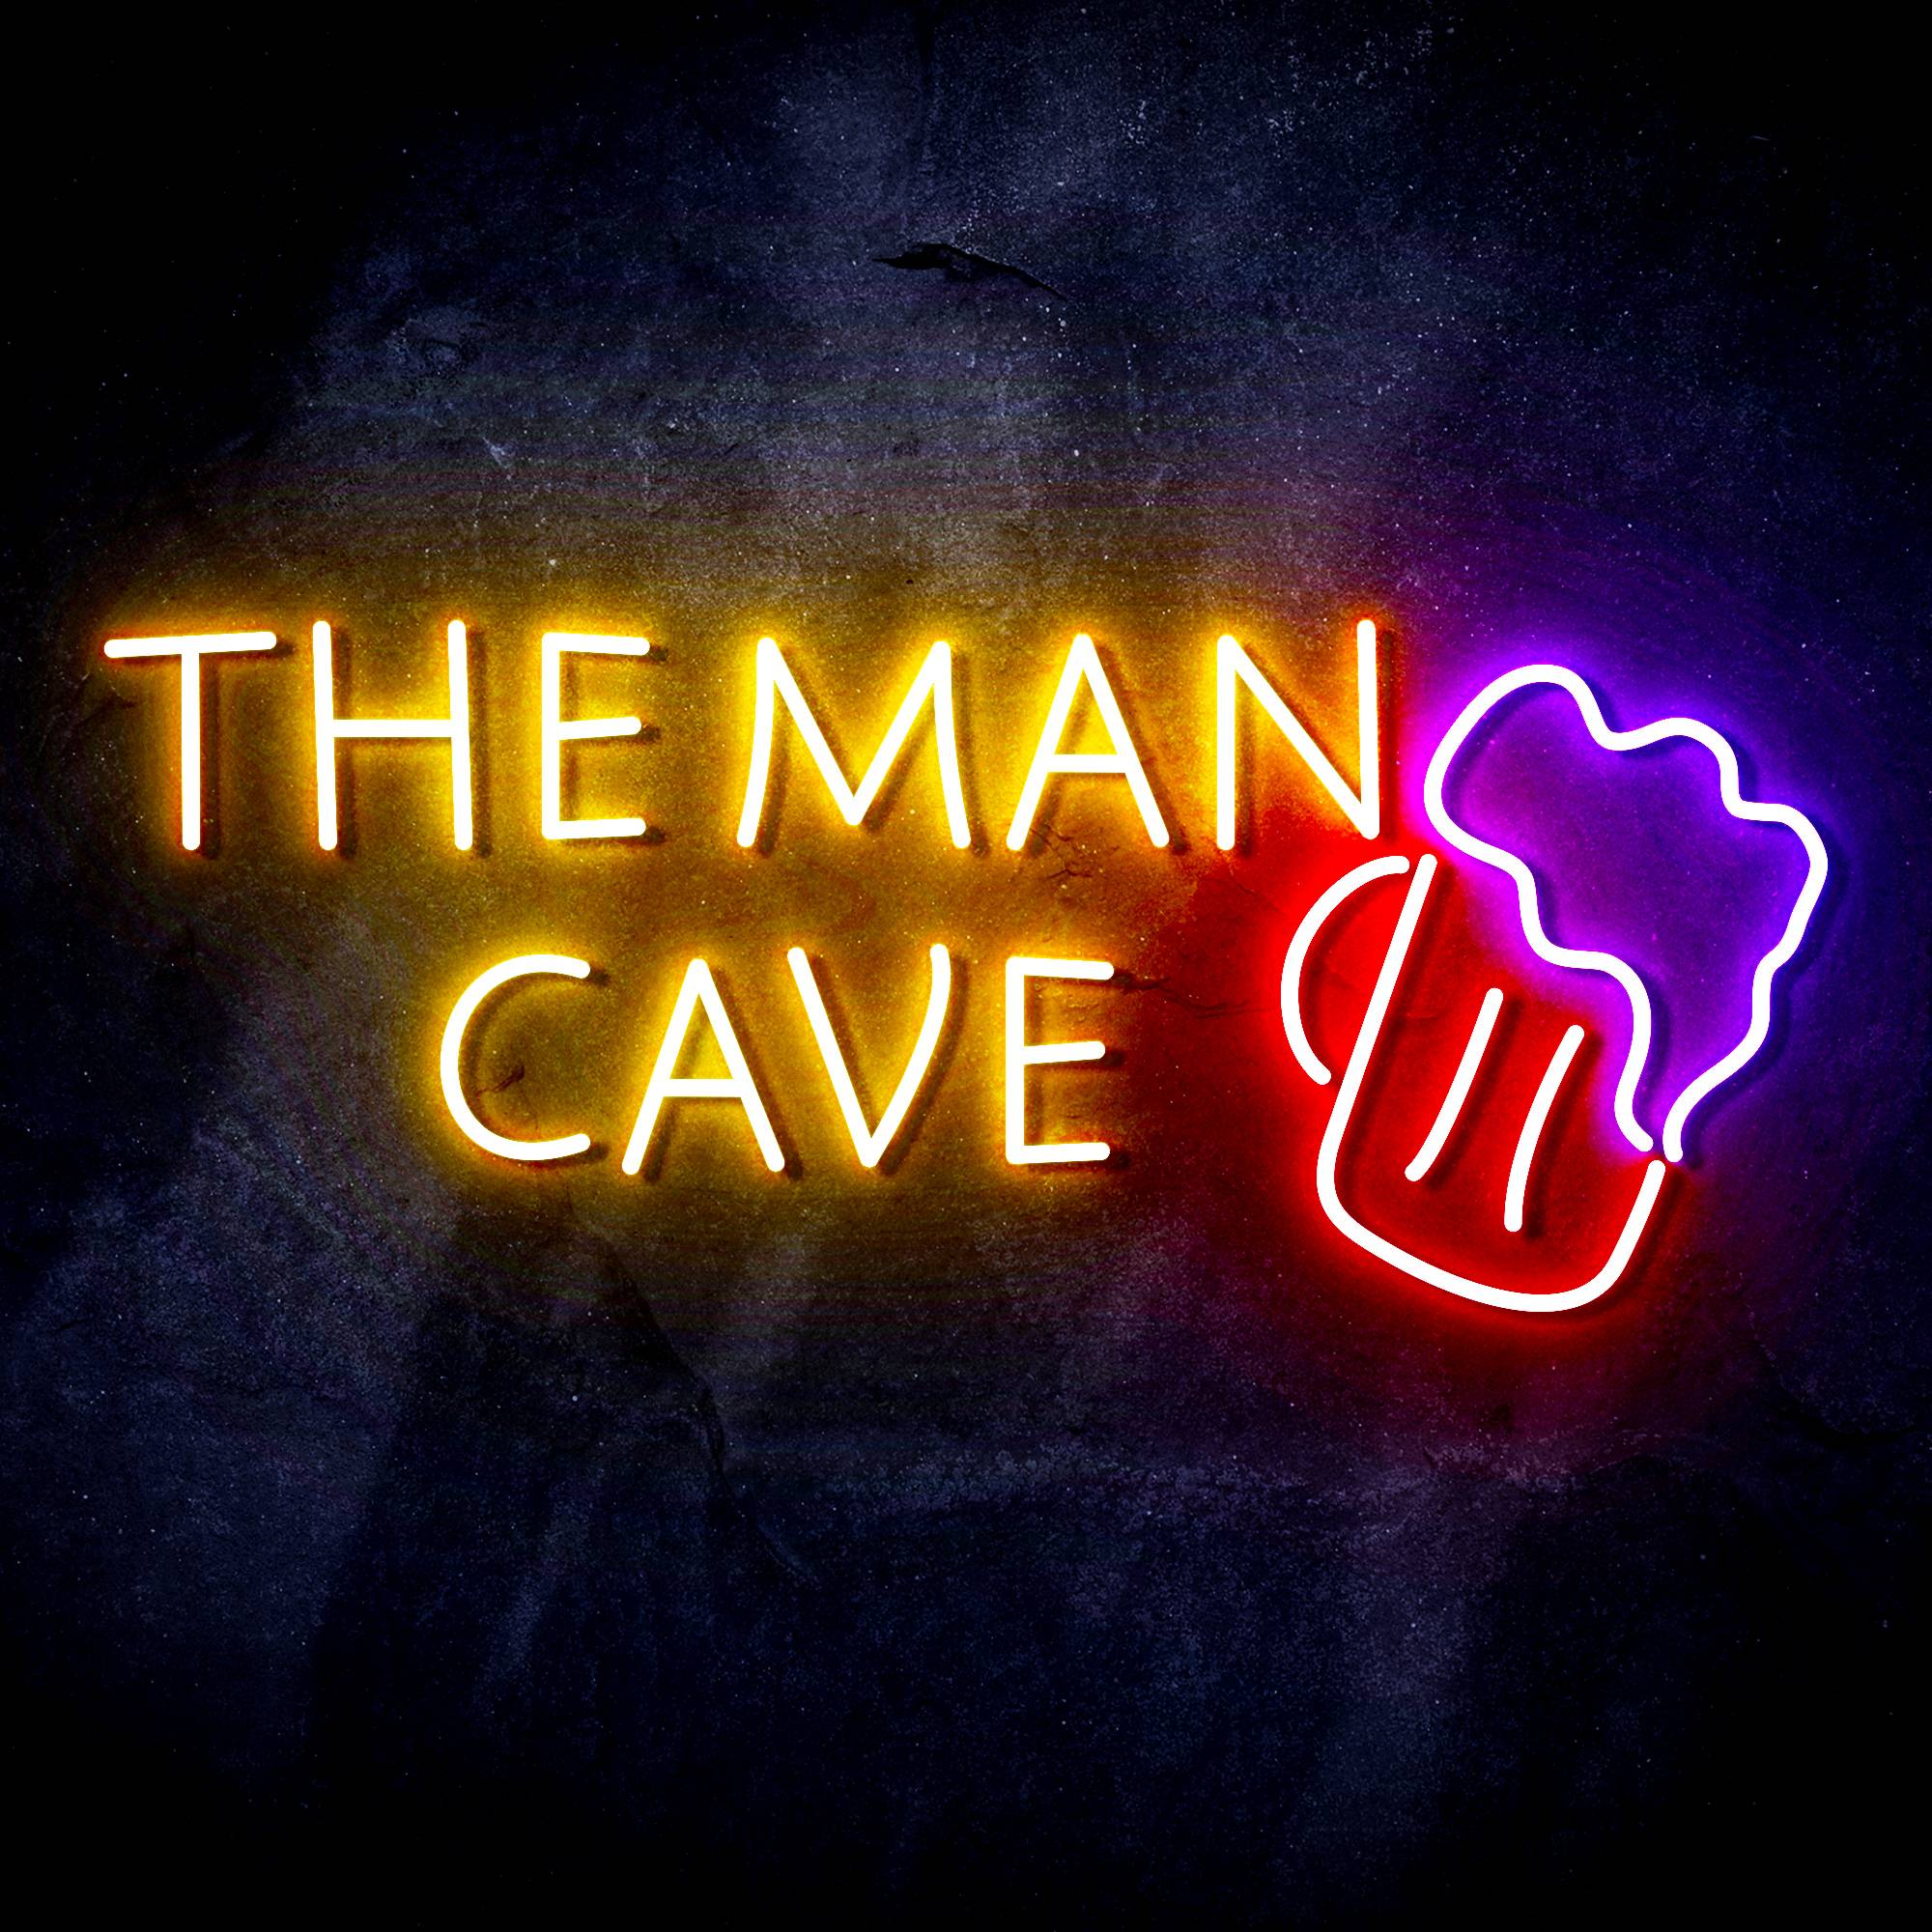 The Man Cave with Beer Mug Signage LED Neon Sign